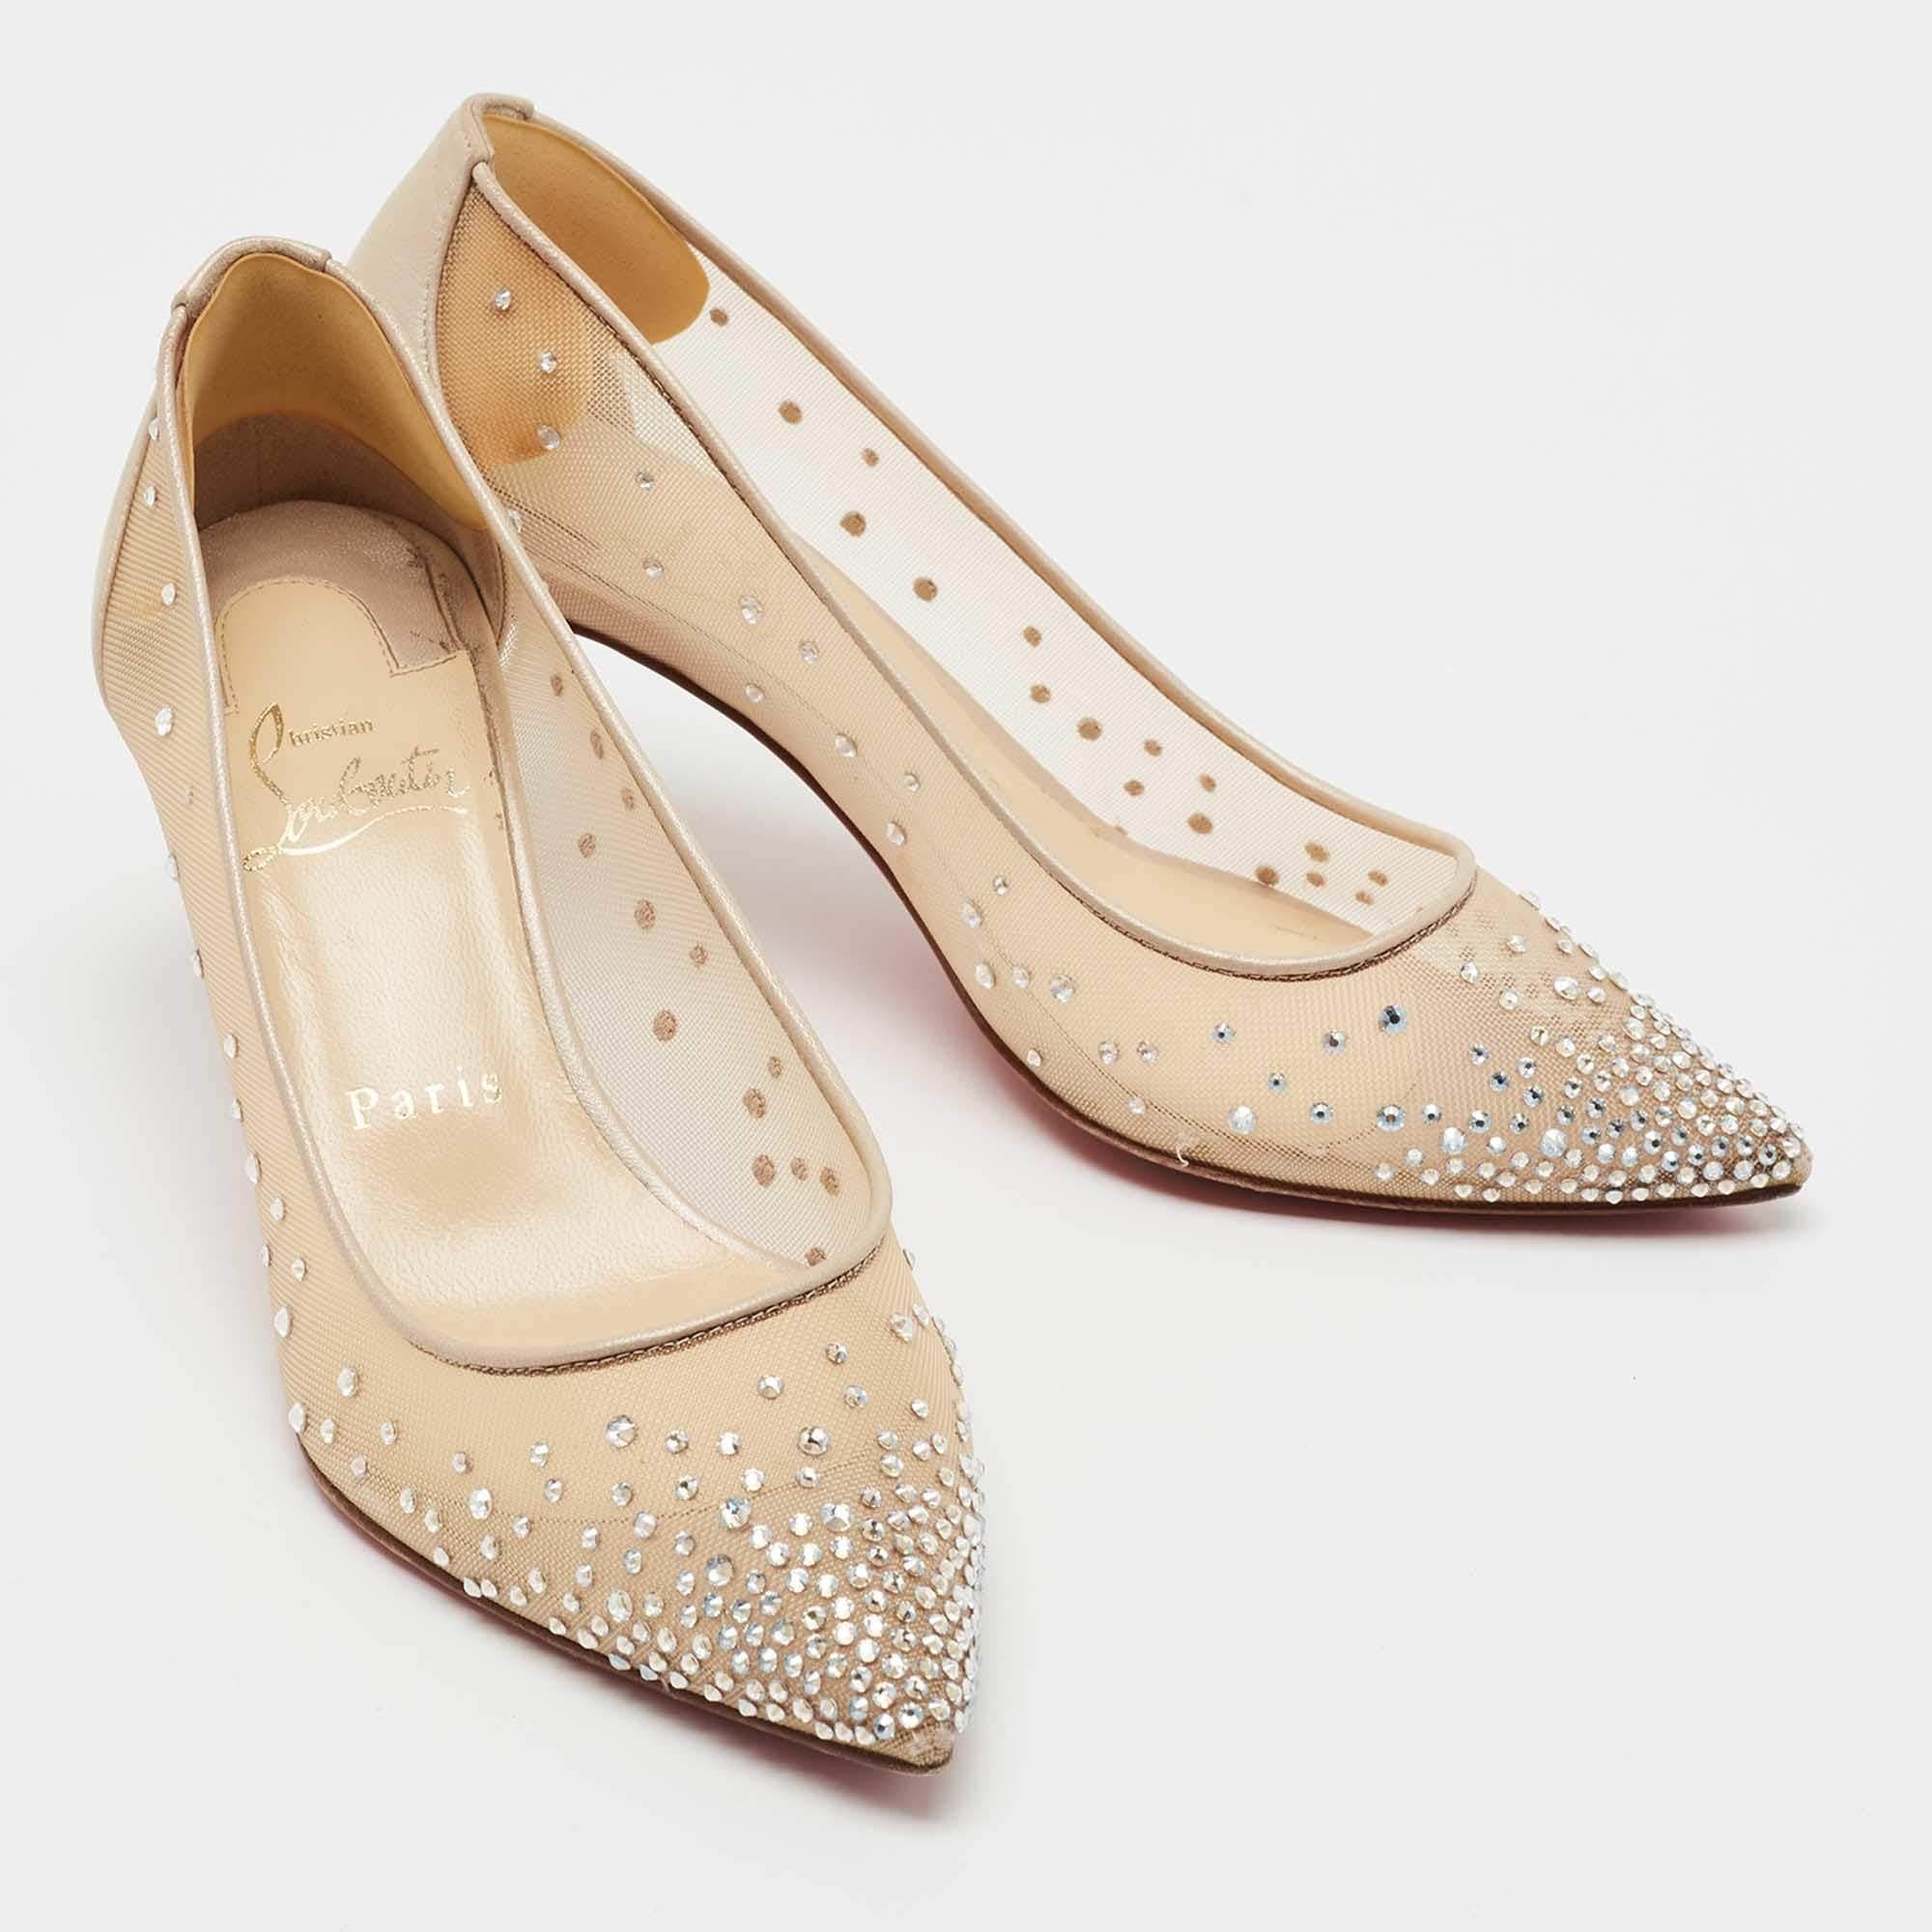 Christian Louboutin Beige Mesh and Leather Follies Strass Pumps Size 35 1